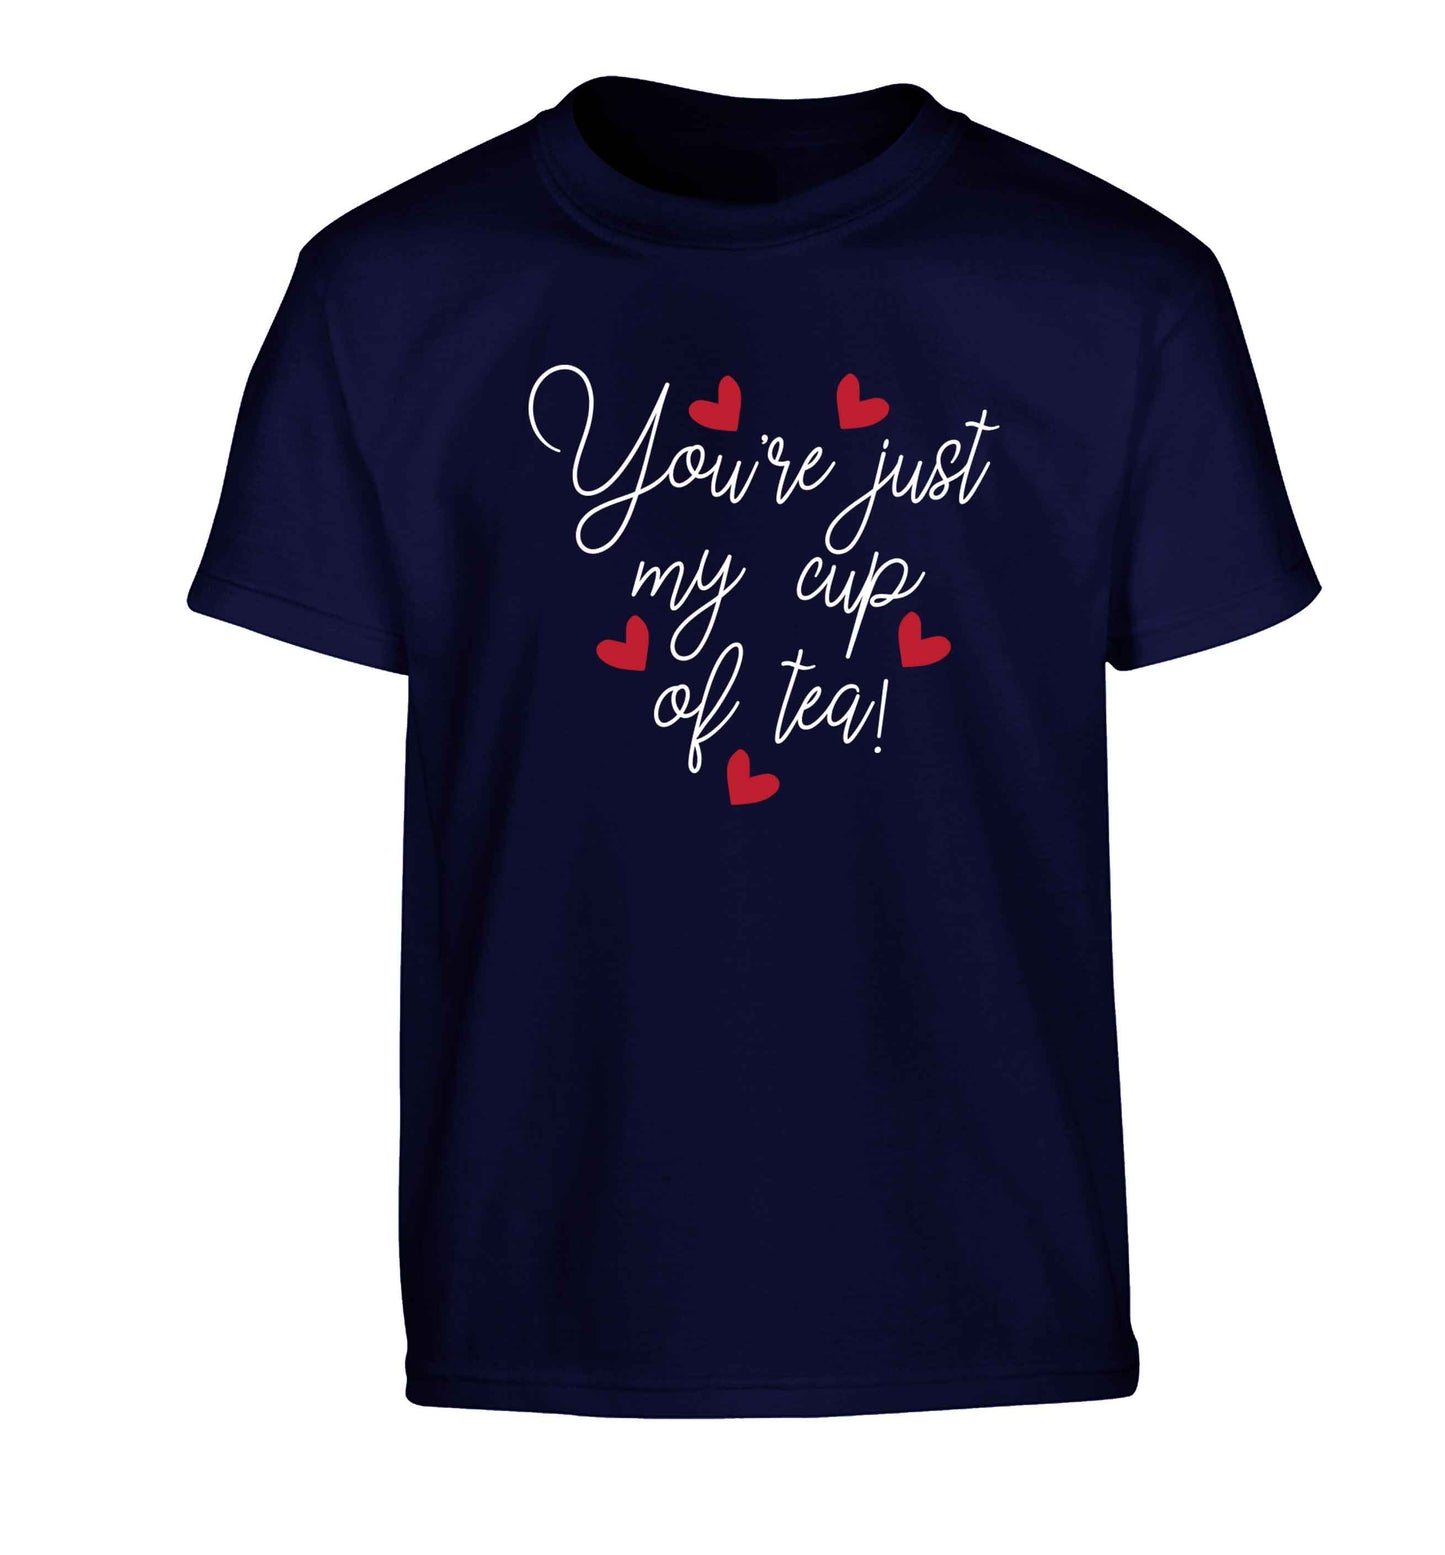 You're just my cup of tea Children's navy Tshirt 12-13 Years